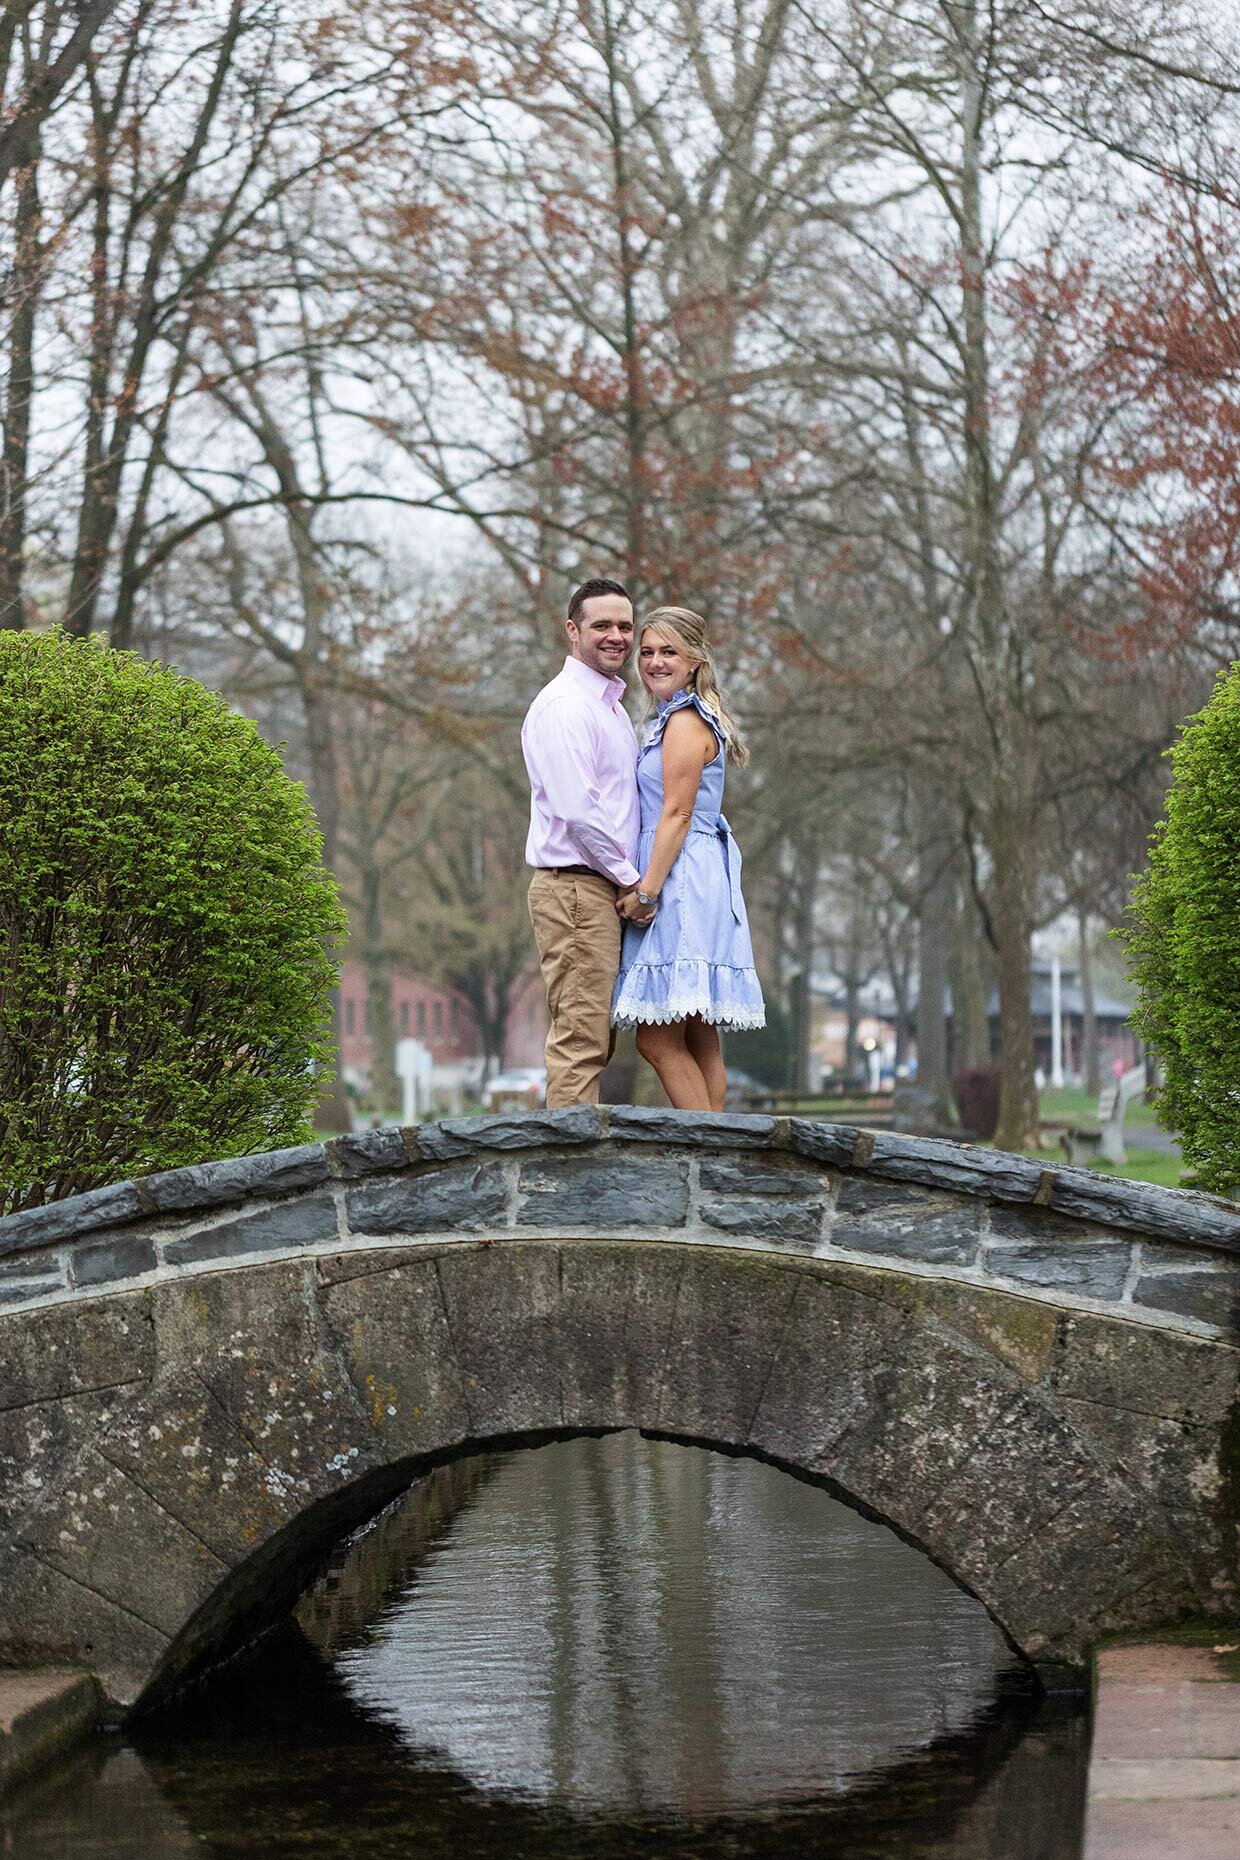 Brianne & Andrew overlooking the stream at Lititz Springs Park, Lititz, PA 